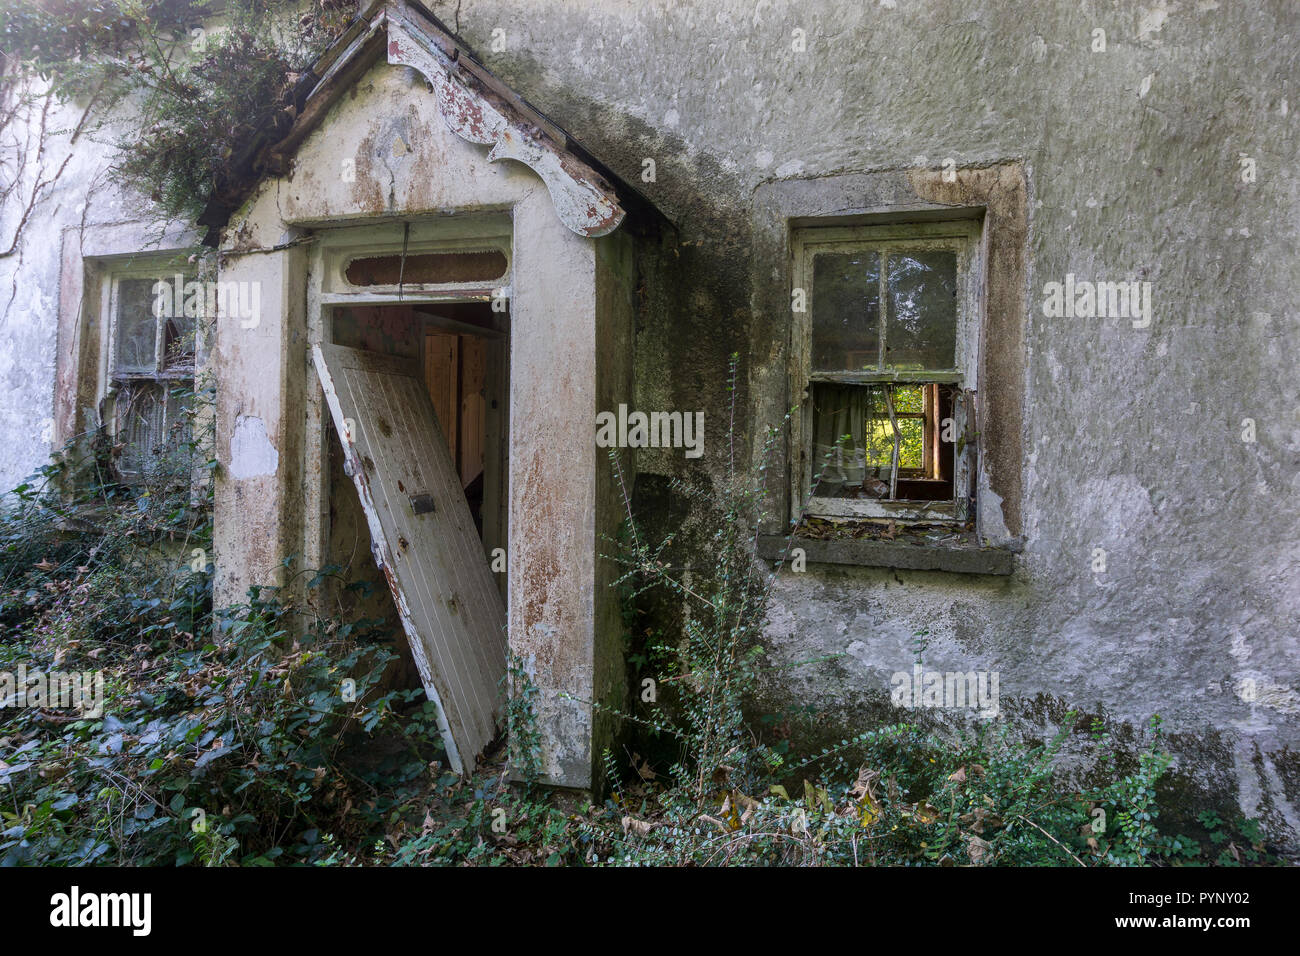 Front of derelict cottage with entrance door leaning to one side in small porch. With a broken window on either side. Vegetation on front of cottage. Stock Photo